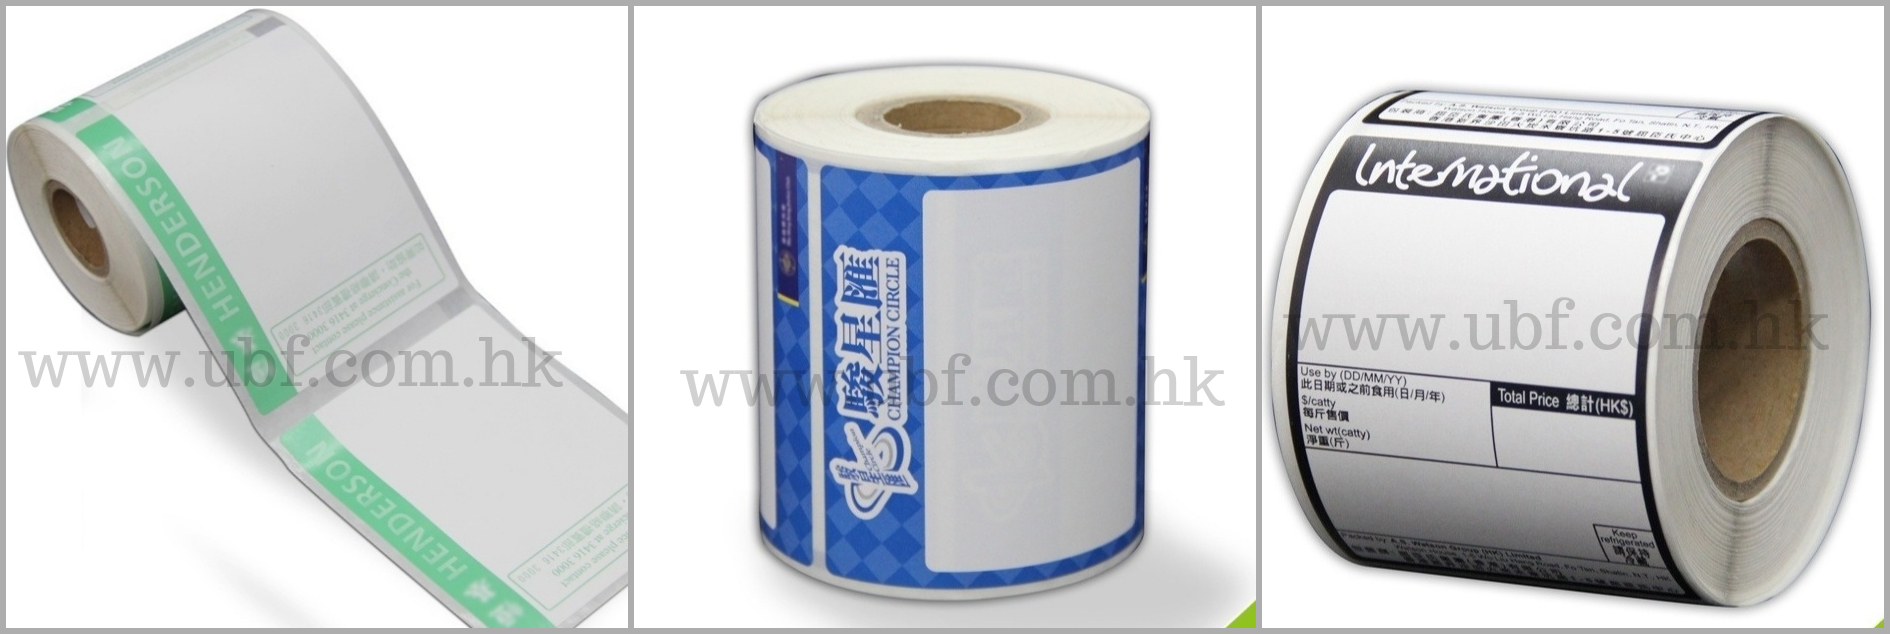 thermal label roll, label